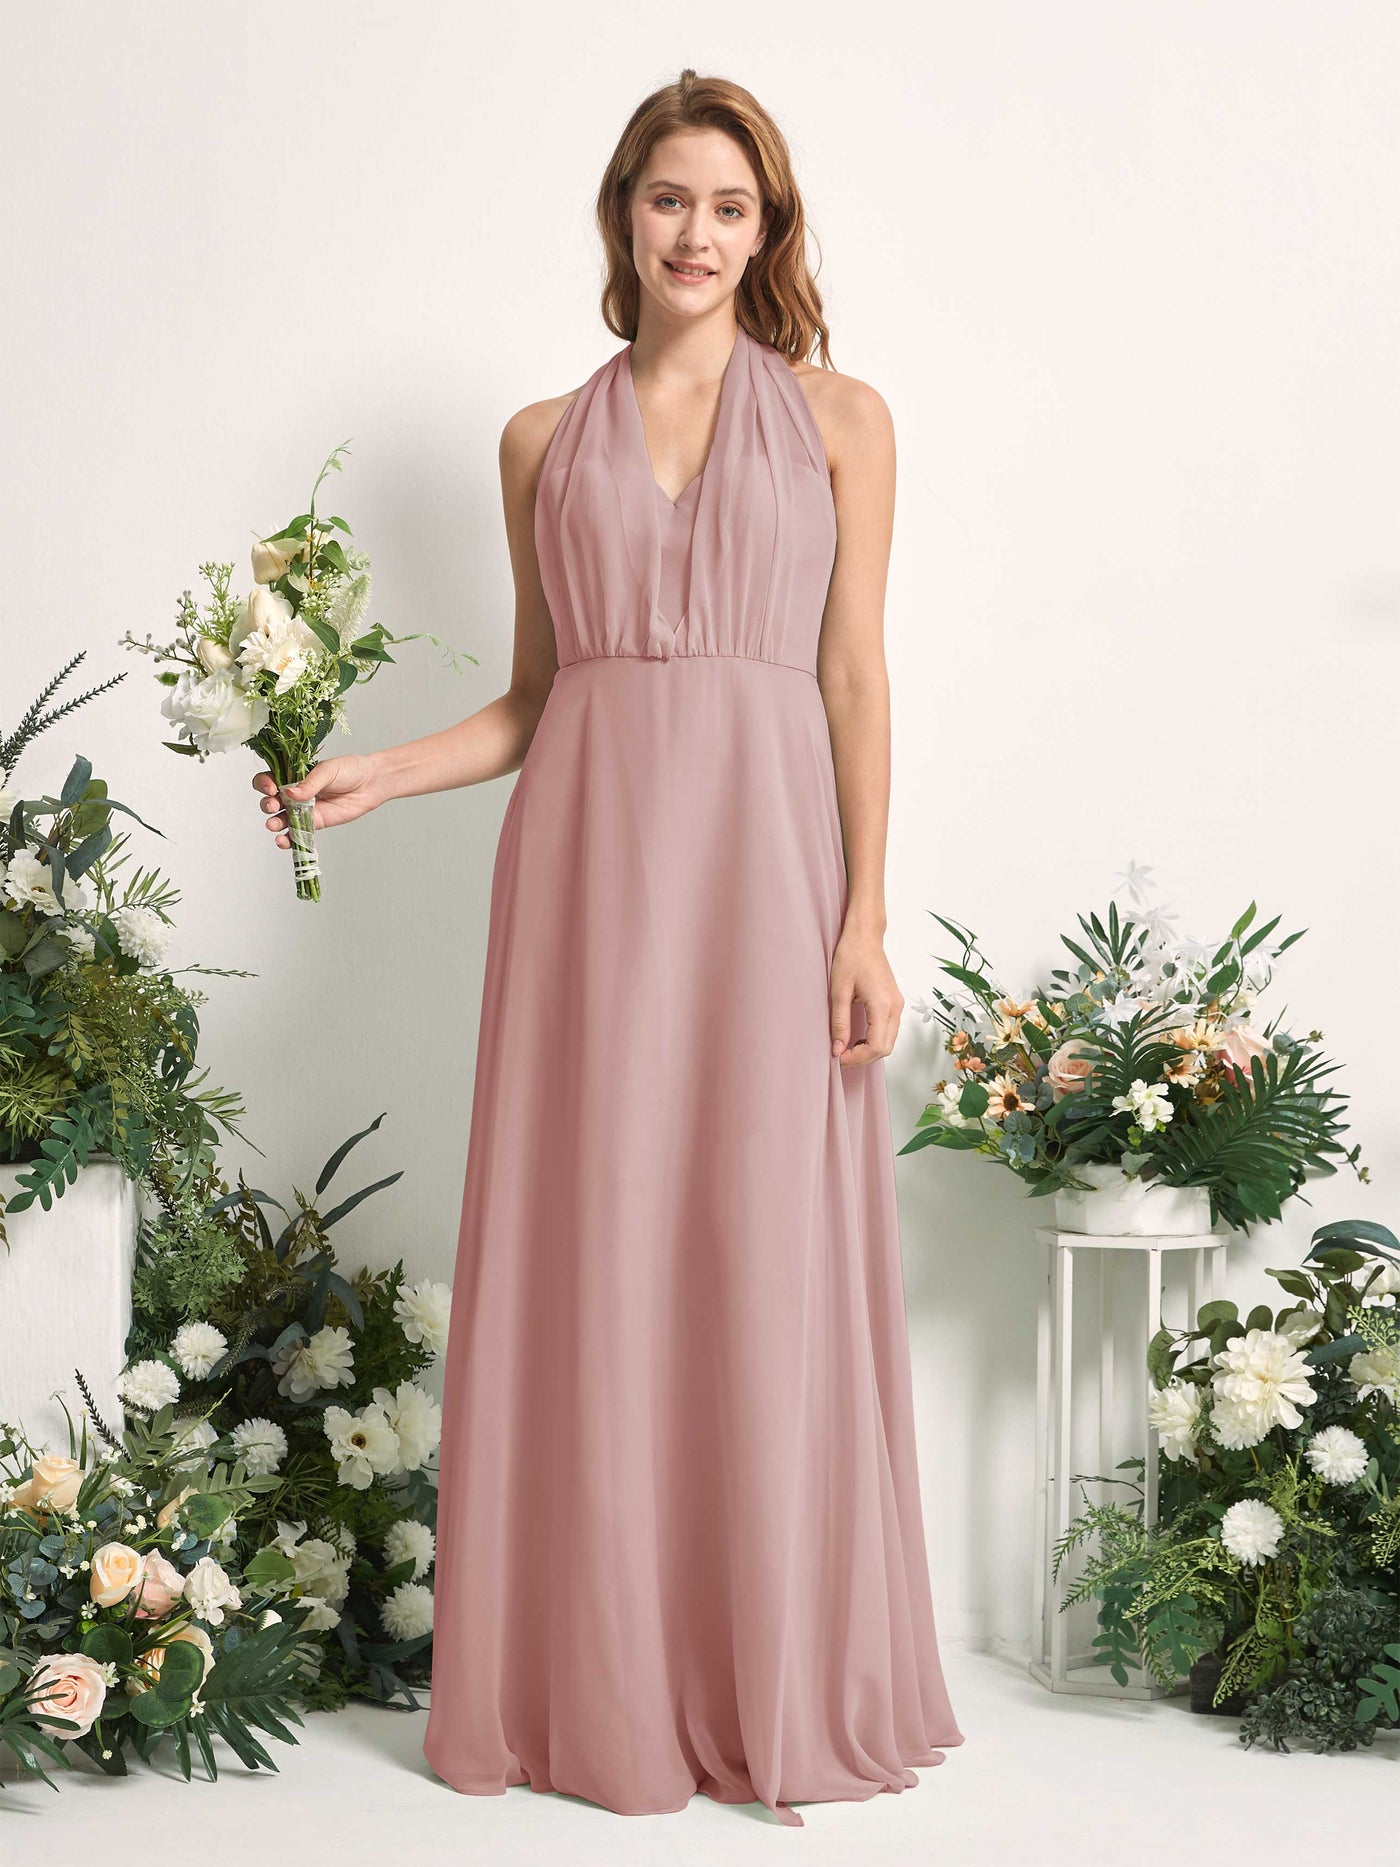 Bridesmaid Dress A-line Chiffon Halter Full Length Short Sleeves Wedding Party Dress - Dusty Rose (81226309)#color_dusty-rose